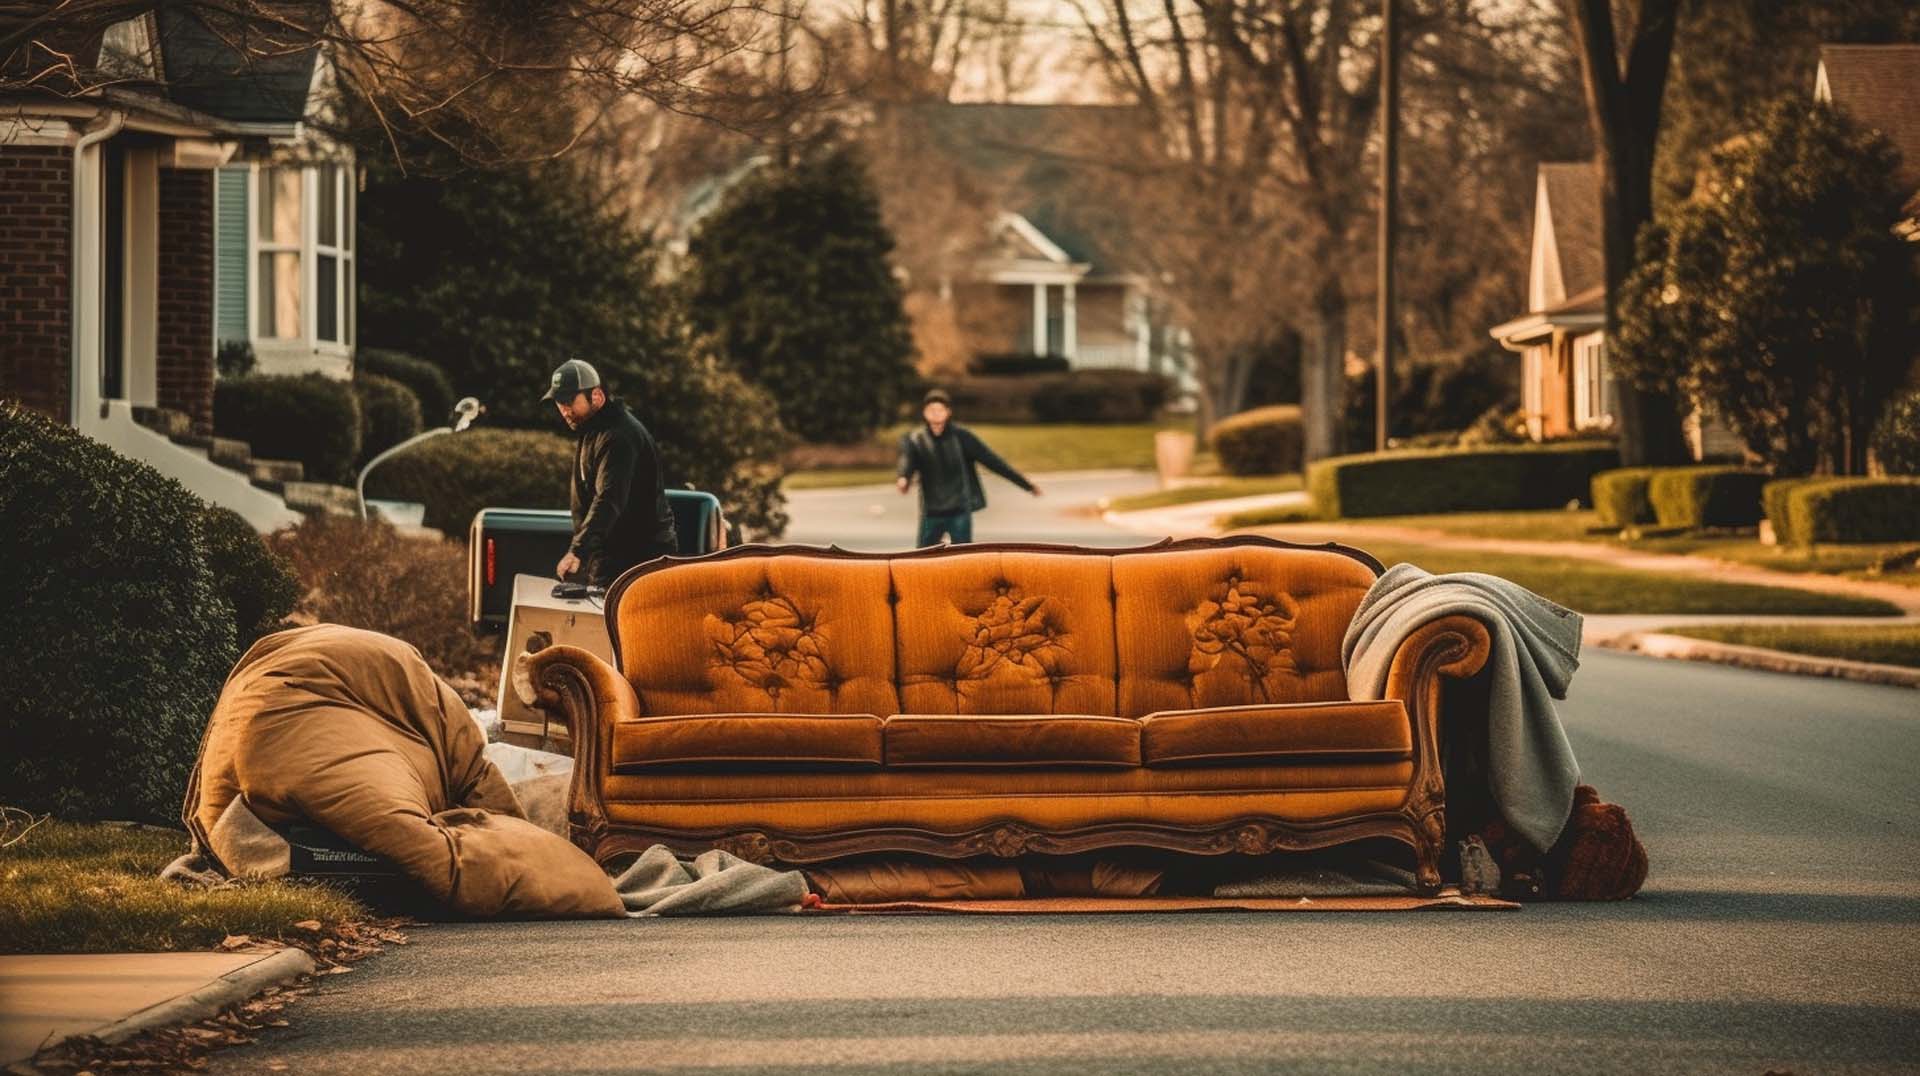 Residential Junk Removal Services in Pembroke